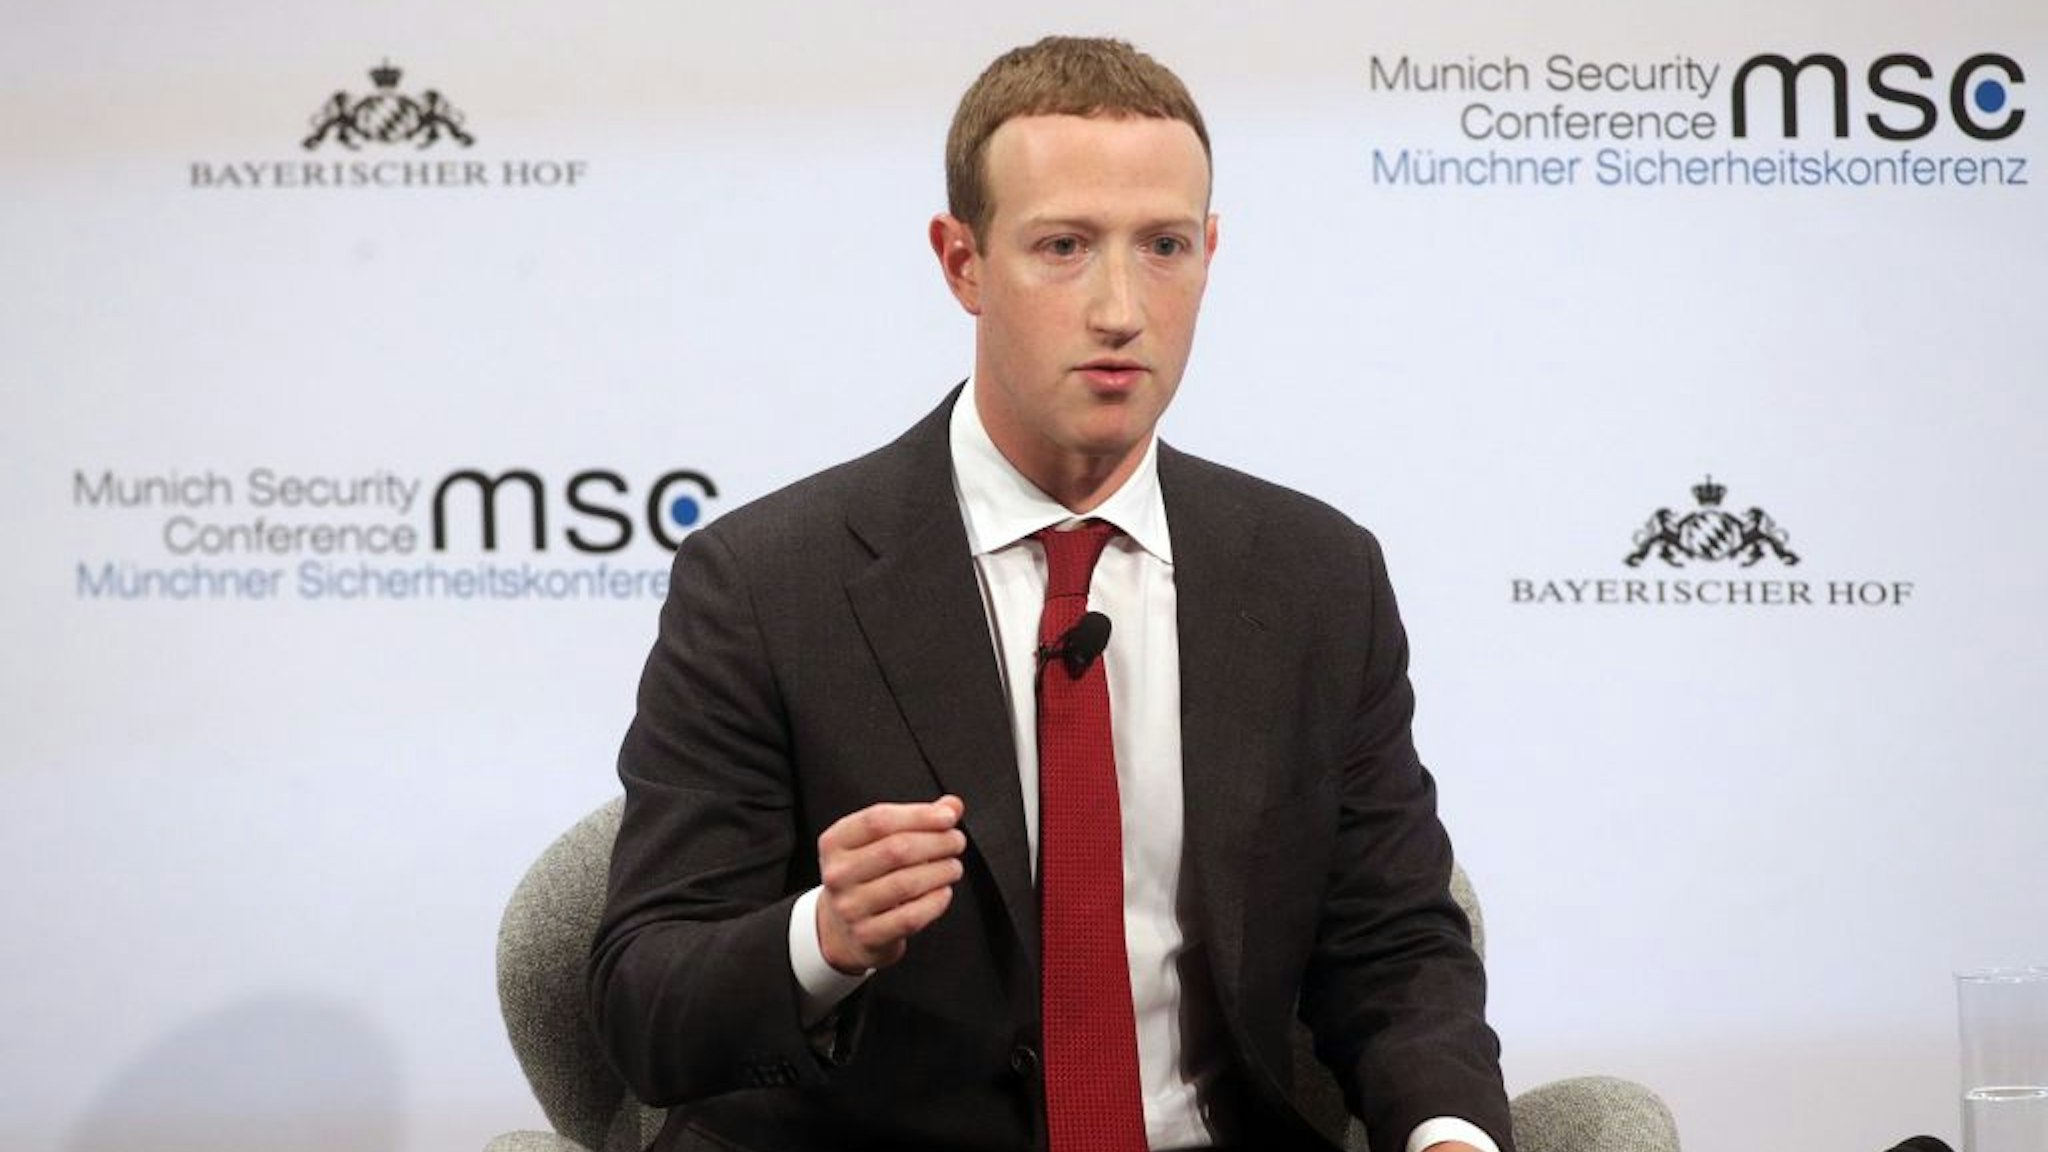 Facebook founder and CEO Mark Zuckerberg speaks during a panel talk at the 2020 Munich Security Conference (MSC) on February 15, 2020 in Munich, Germany.